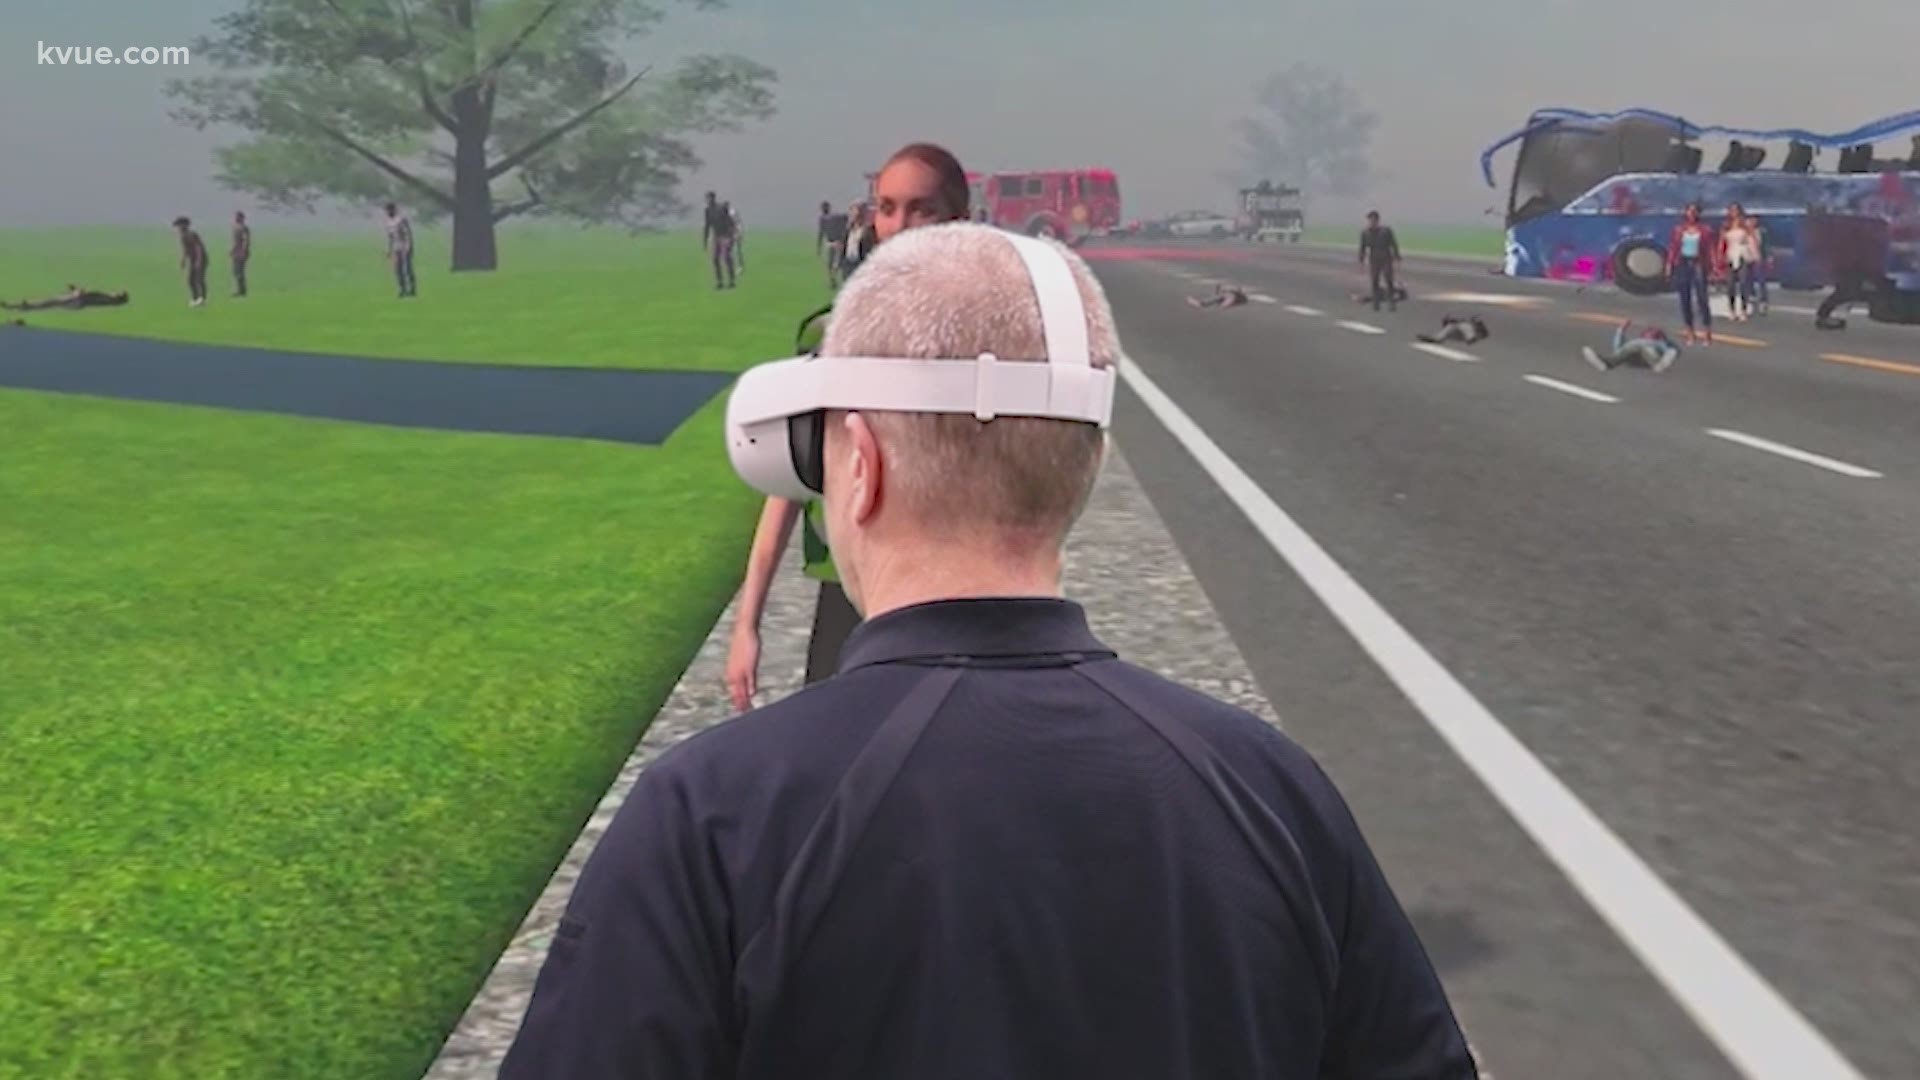 The City of Austin is using virtual reality technology to train first responders, in partnership with a local startup called Augmented Training Systems.